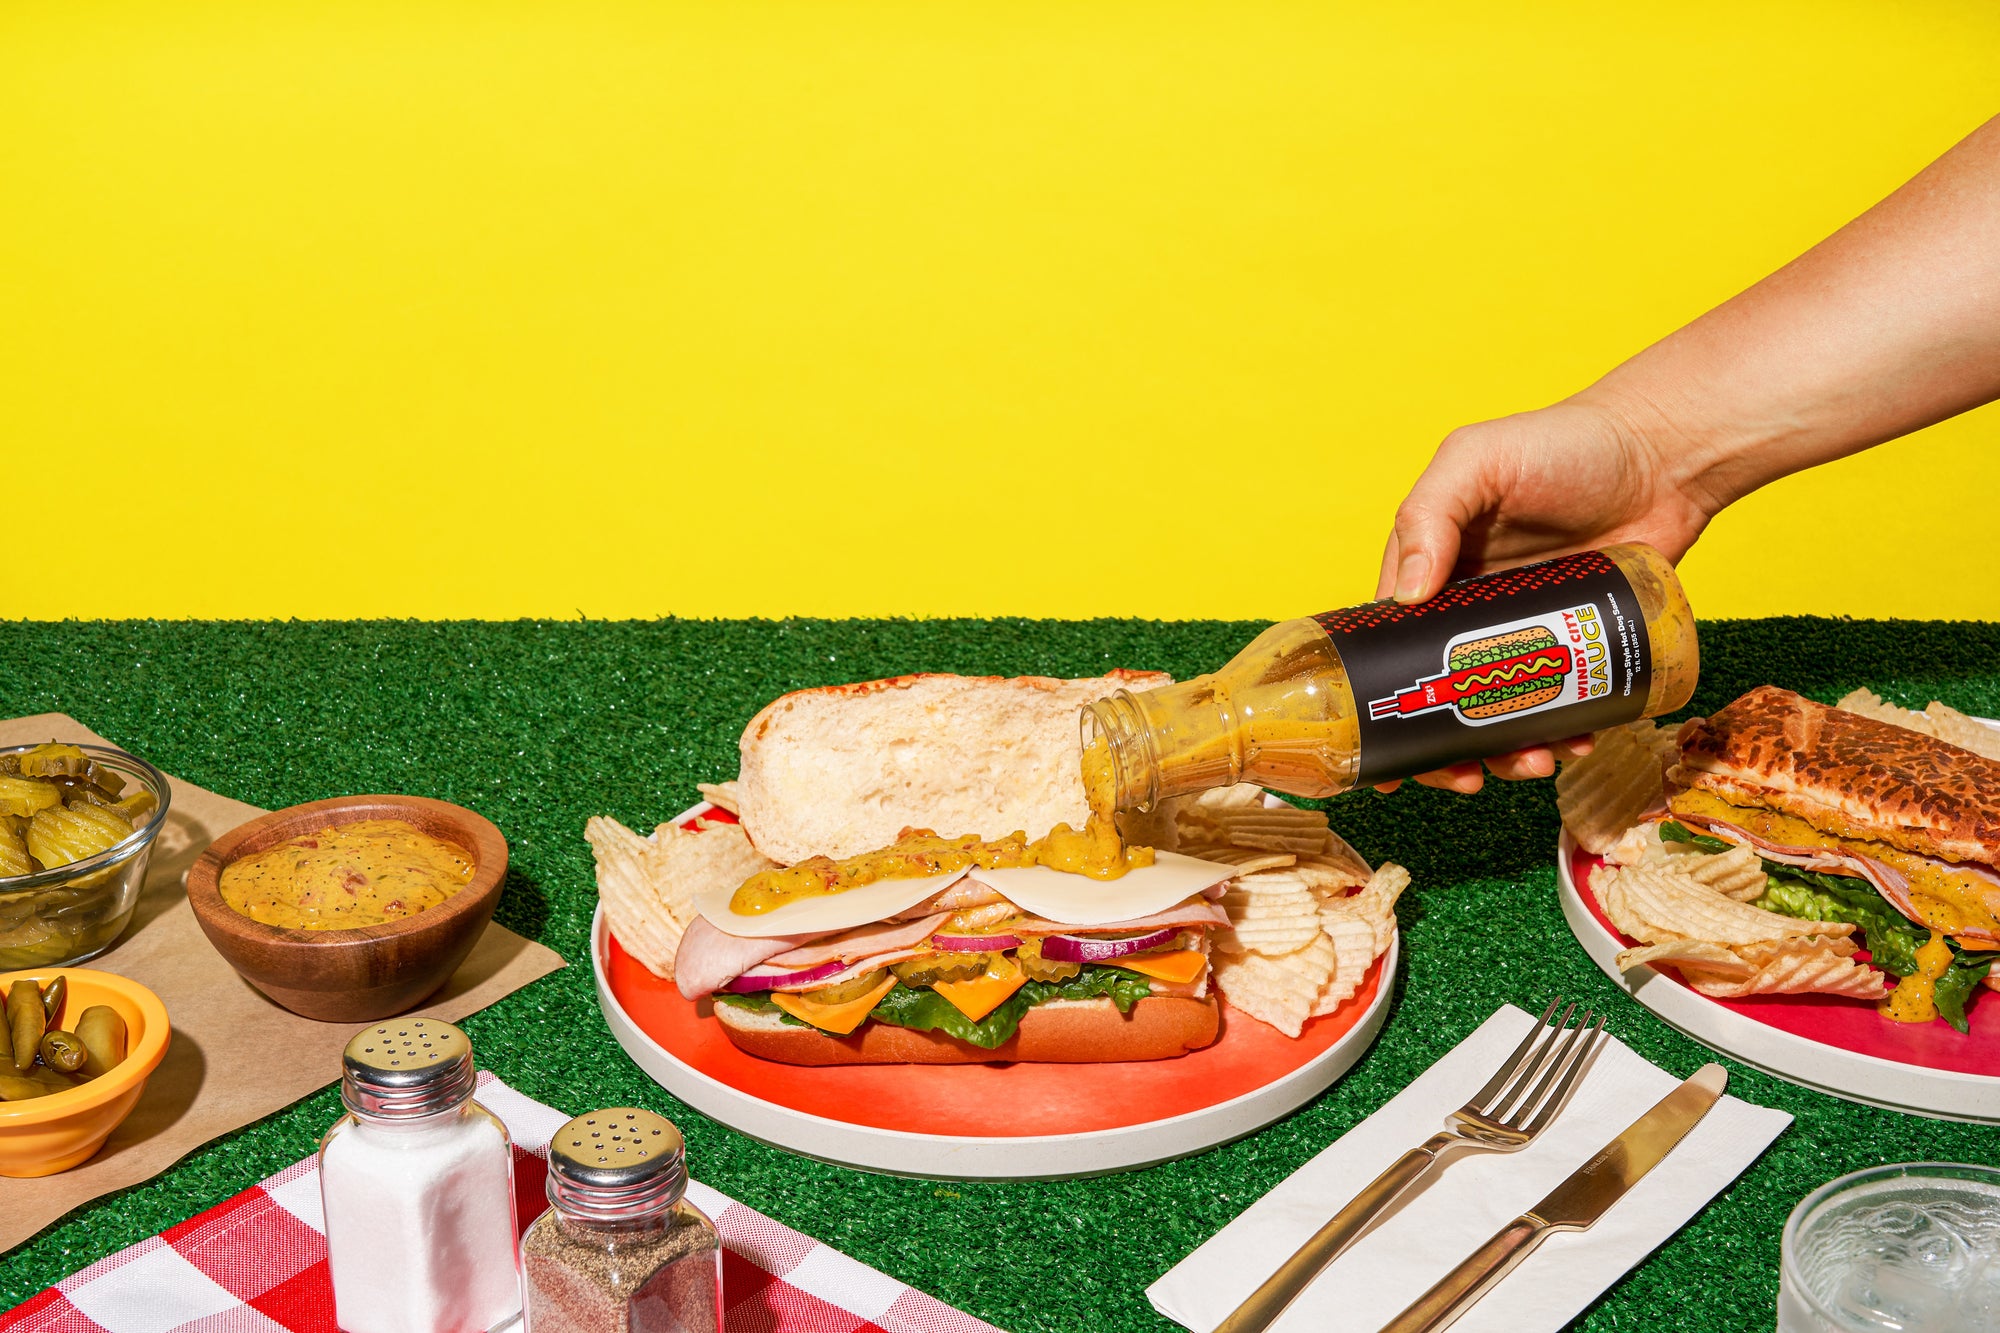 A bottle of mustard being held next to a hamburger